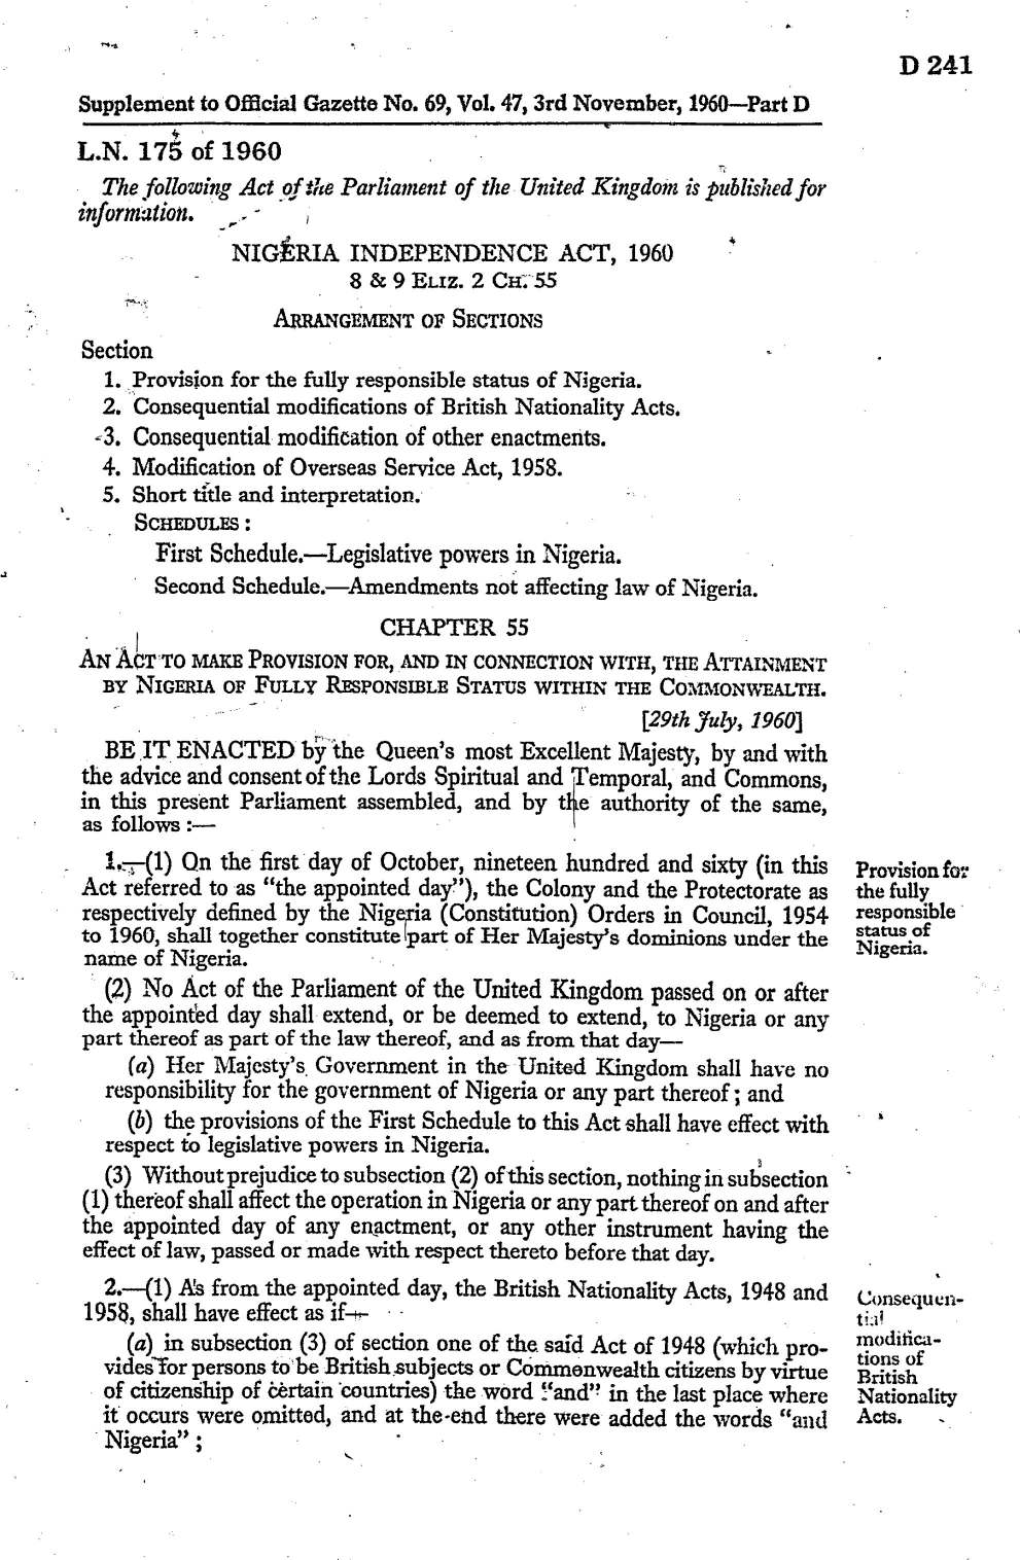 L.N. 175 of 1960 a ; the Following Act Ofte Parliament of the United Kingdomis Publishedfor Information, -- NIGERIA INDEPENDENCE ACT, 1960 8 & 9 Exiz